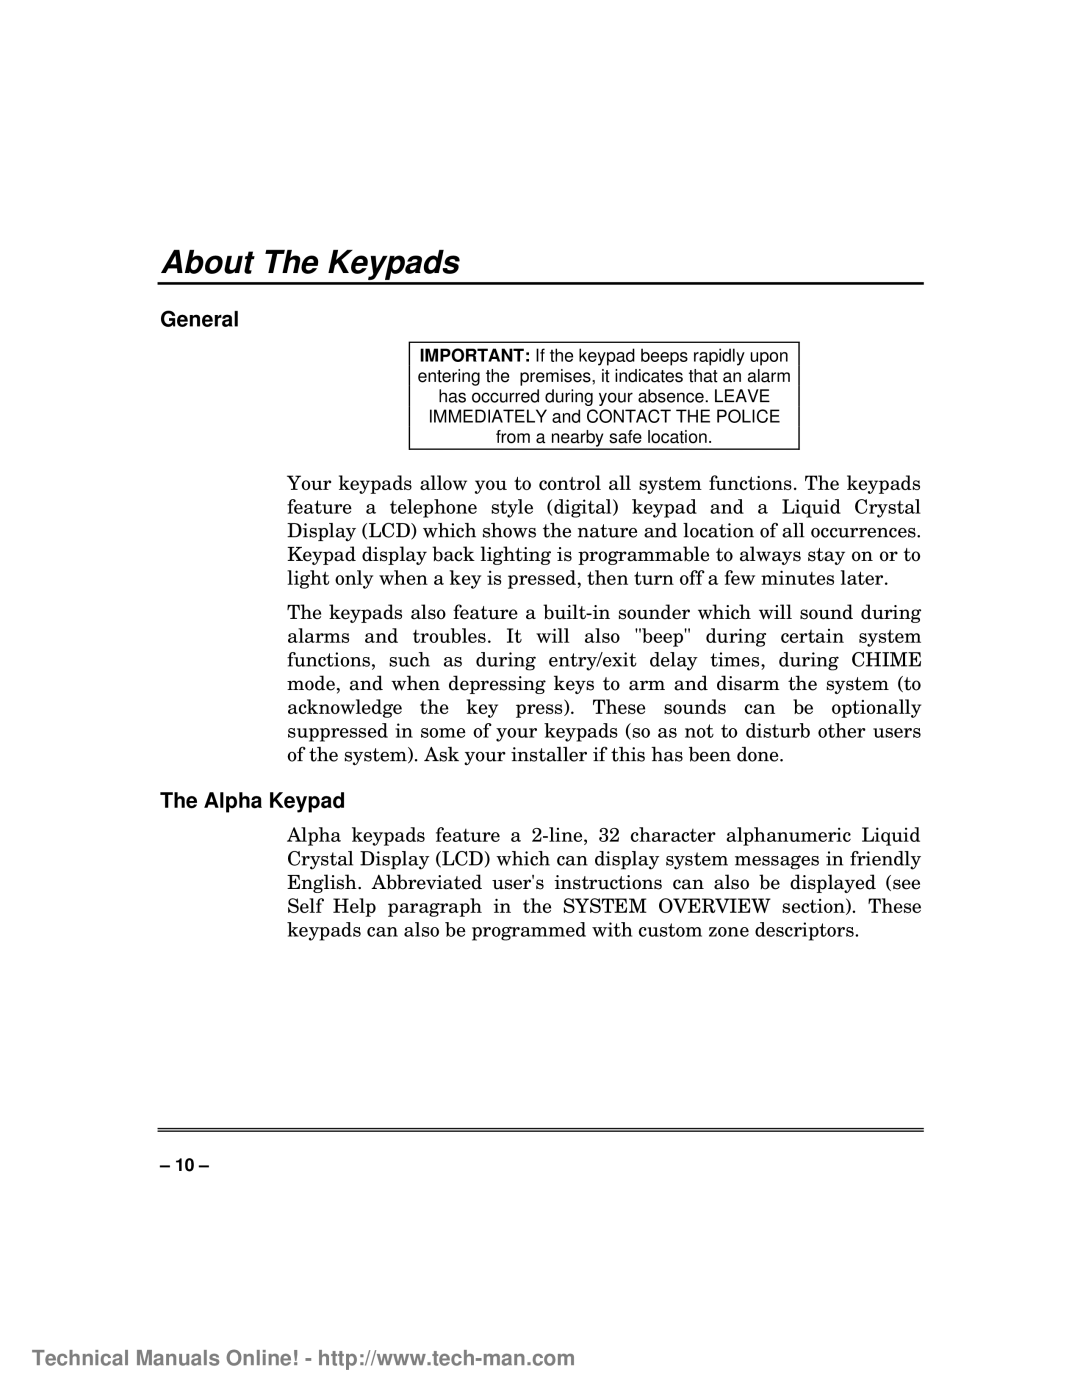 First Alert fa1600c, FA1600C/CA/CB technical manual About The Keypads, The Alpha Keypad, General 